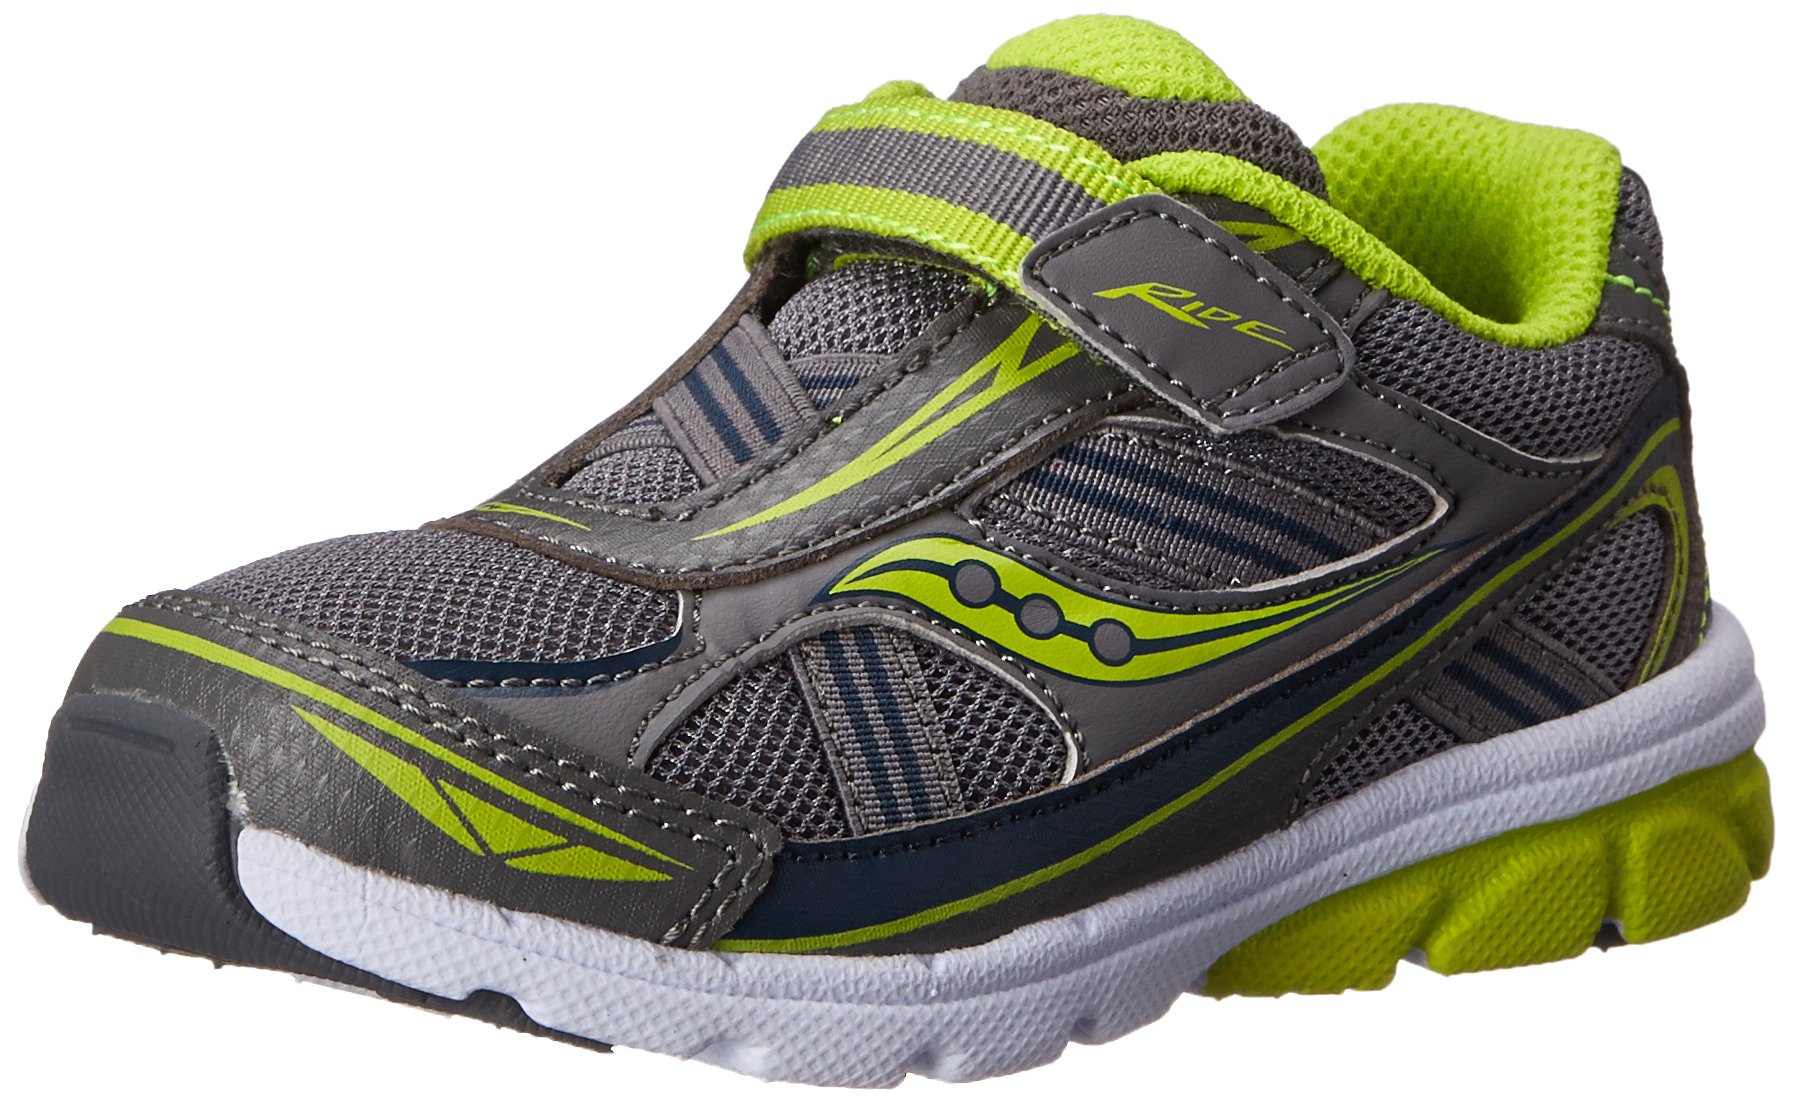 Saucony Boys' Baby Ride Sneaker (Toddler/Little Kid),Grey/Lime,5 M US Toddler